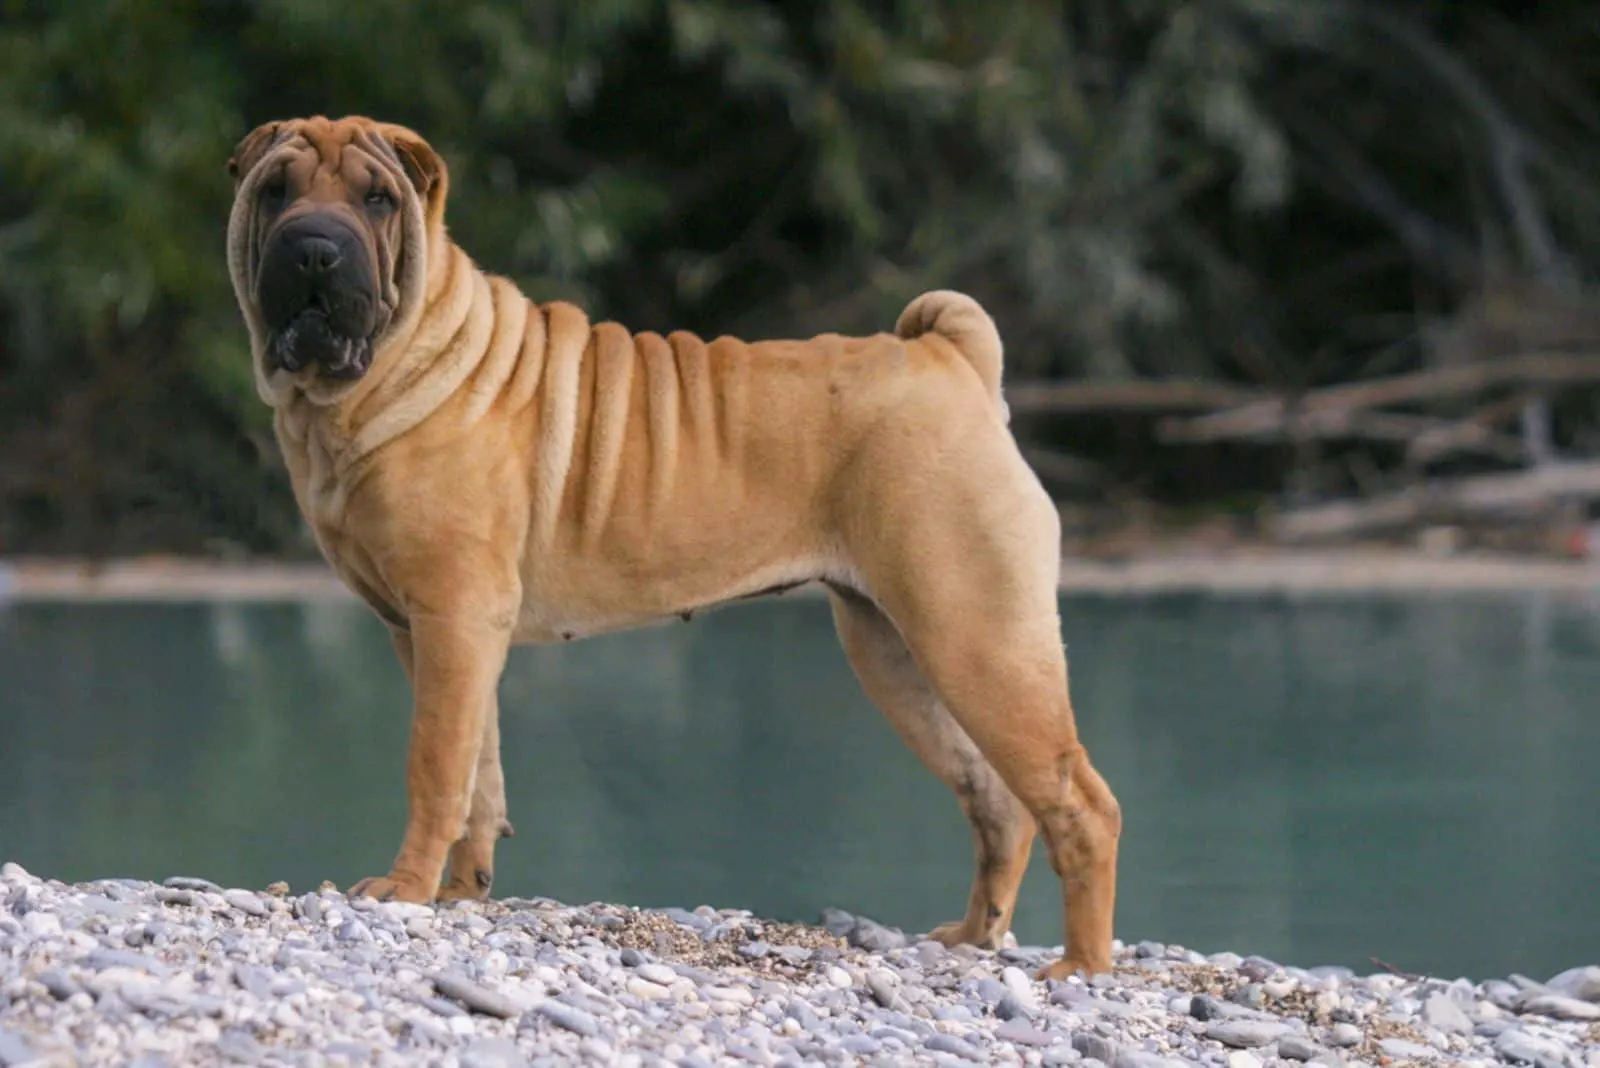  Shar Pei Dog in outdoors